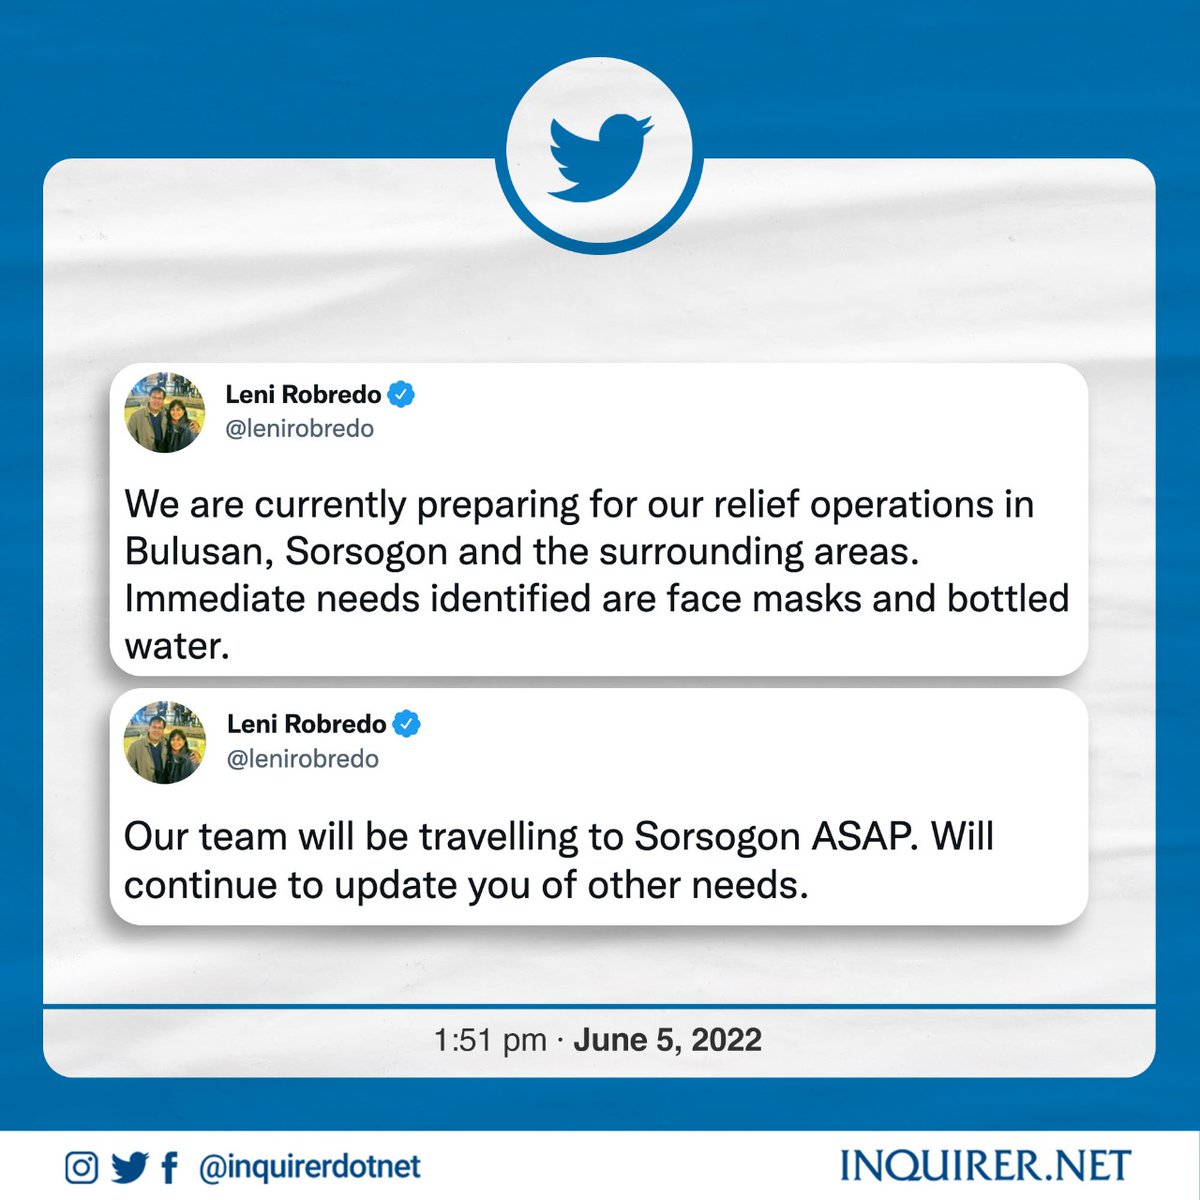 ‘OUR TEAM WILL BE TRAVELLING TO SORSOGON ASAP’ LOOK: Outgoing Vice President Leni Robredo announces that her team is set to go to Sorsogon to deliver aid to those affected by the phreatic eruption of Bulusan Volcano on Sunday.